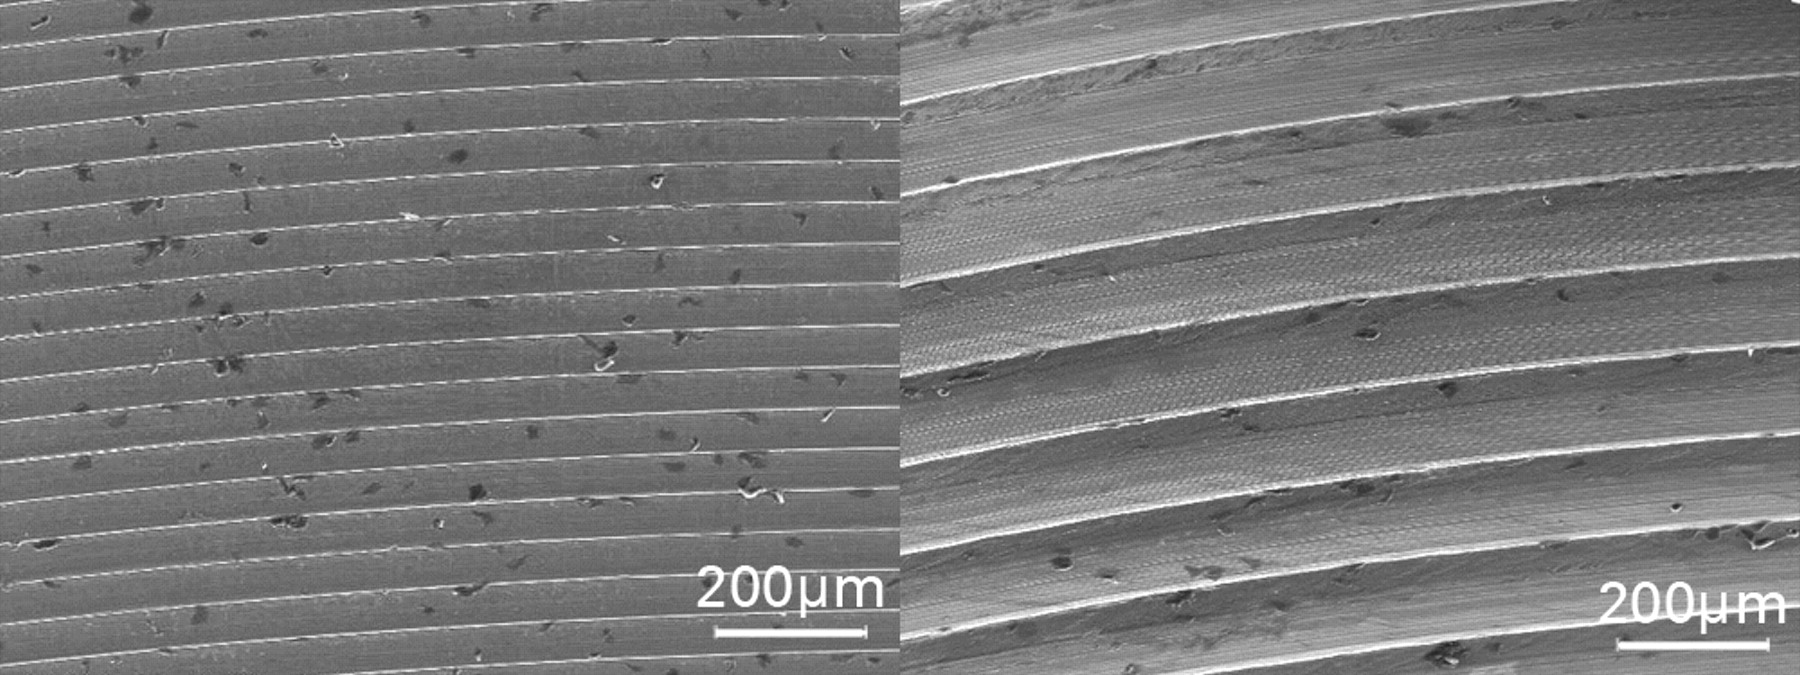 Fig. 4 
          Scanning electron microscopy (SEM) images
of an area of unworn manufactured taper surface (left) and an area
deeper in the same taper that shows the imprint of the machining
grooves of the trunnion (right). Note: images are at the same level of
magnification.
        